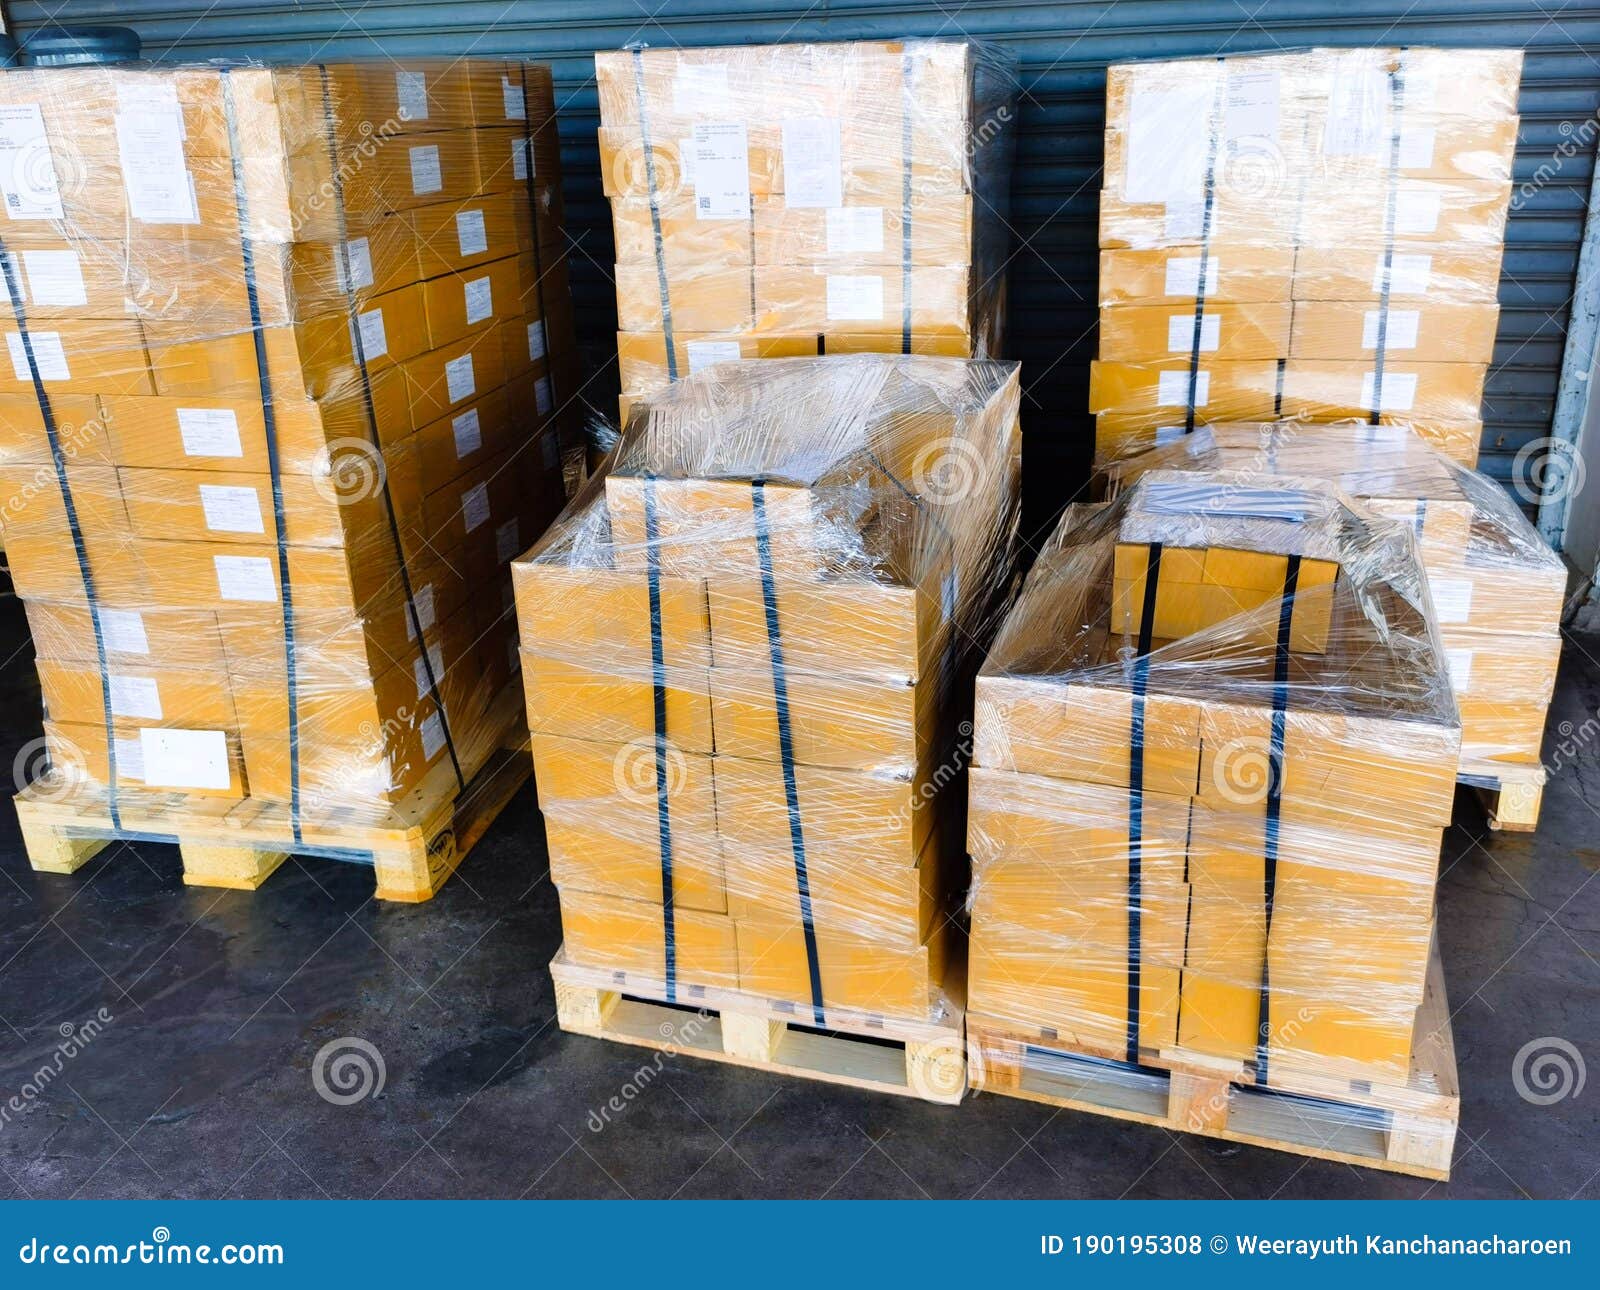 Shipment Cartons Box On Pallets And Wooden Case On Hand Lift In Interior Warehouse Cargo For